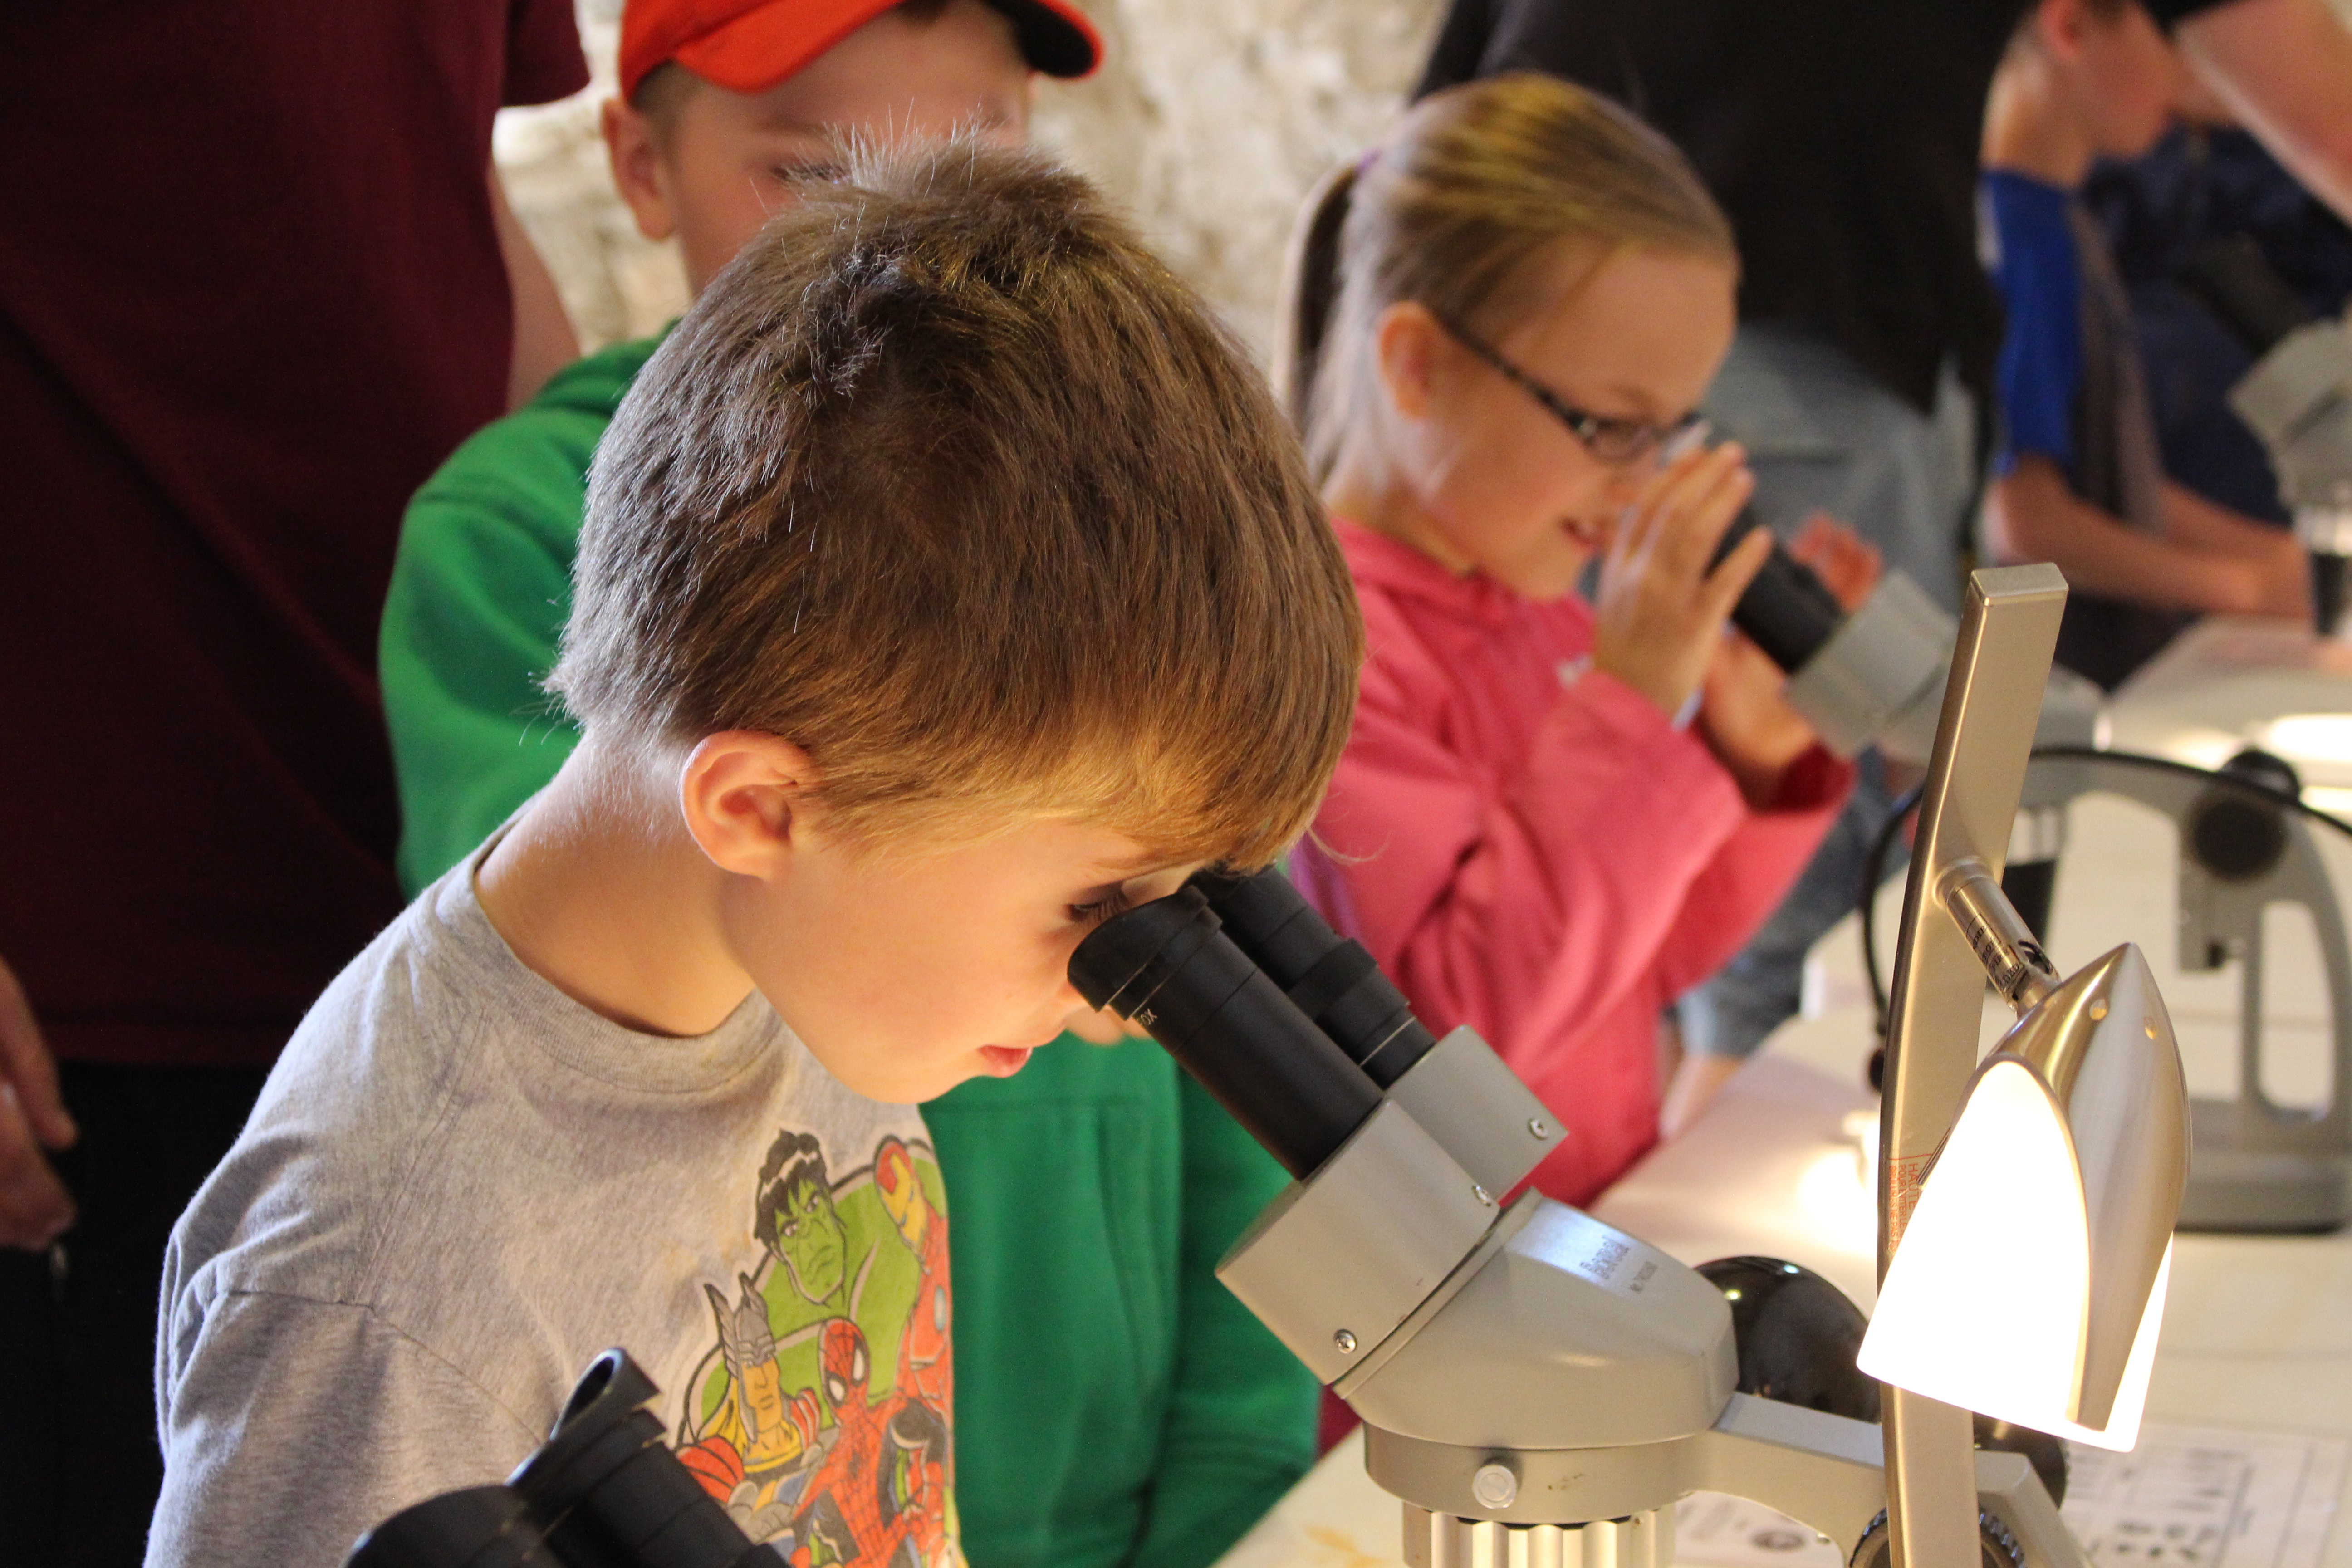 Looking through the microscope and discovering small species.